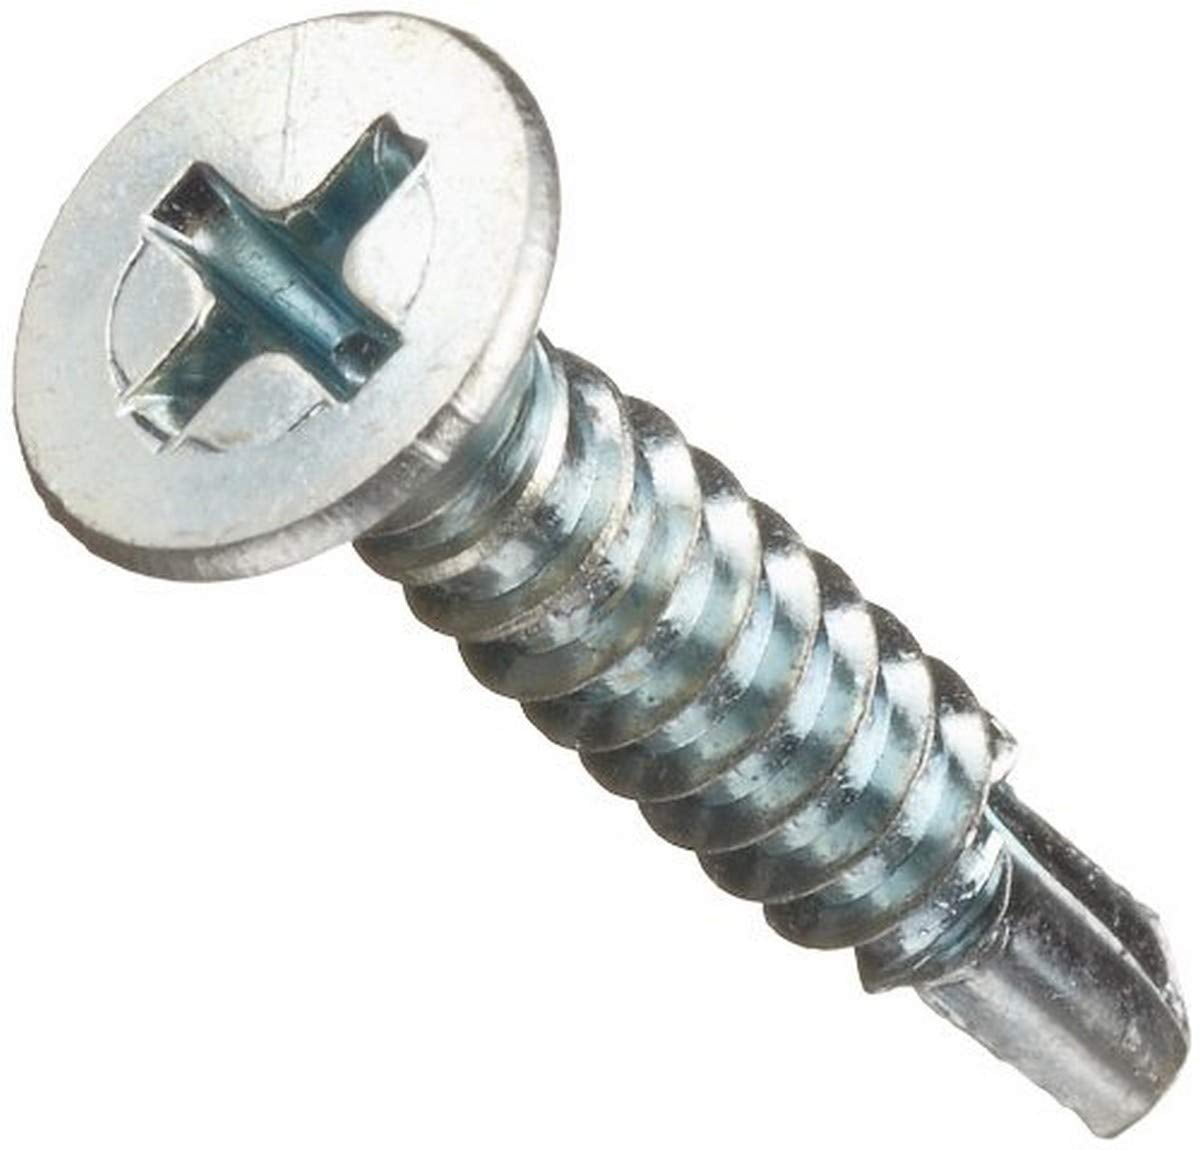 82 Degree Flat Head Phillips Drive Pack of 5 Zinc Plated 4 Length Pack of 5 5/16-18 Thread Size 4 Length Type F Steel Thread Cutting Screw Small Parts 3164FPF 5/16-18 Thread Size 